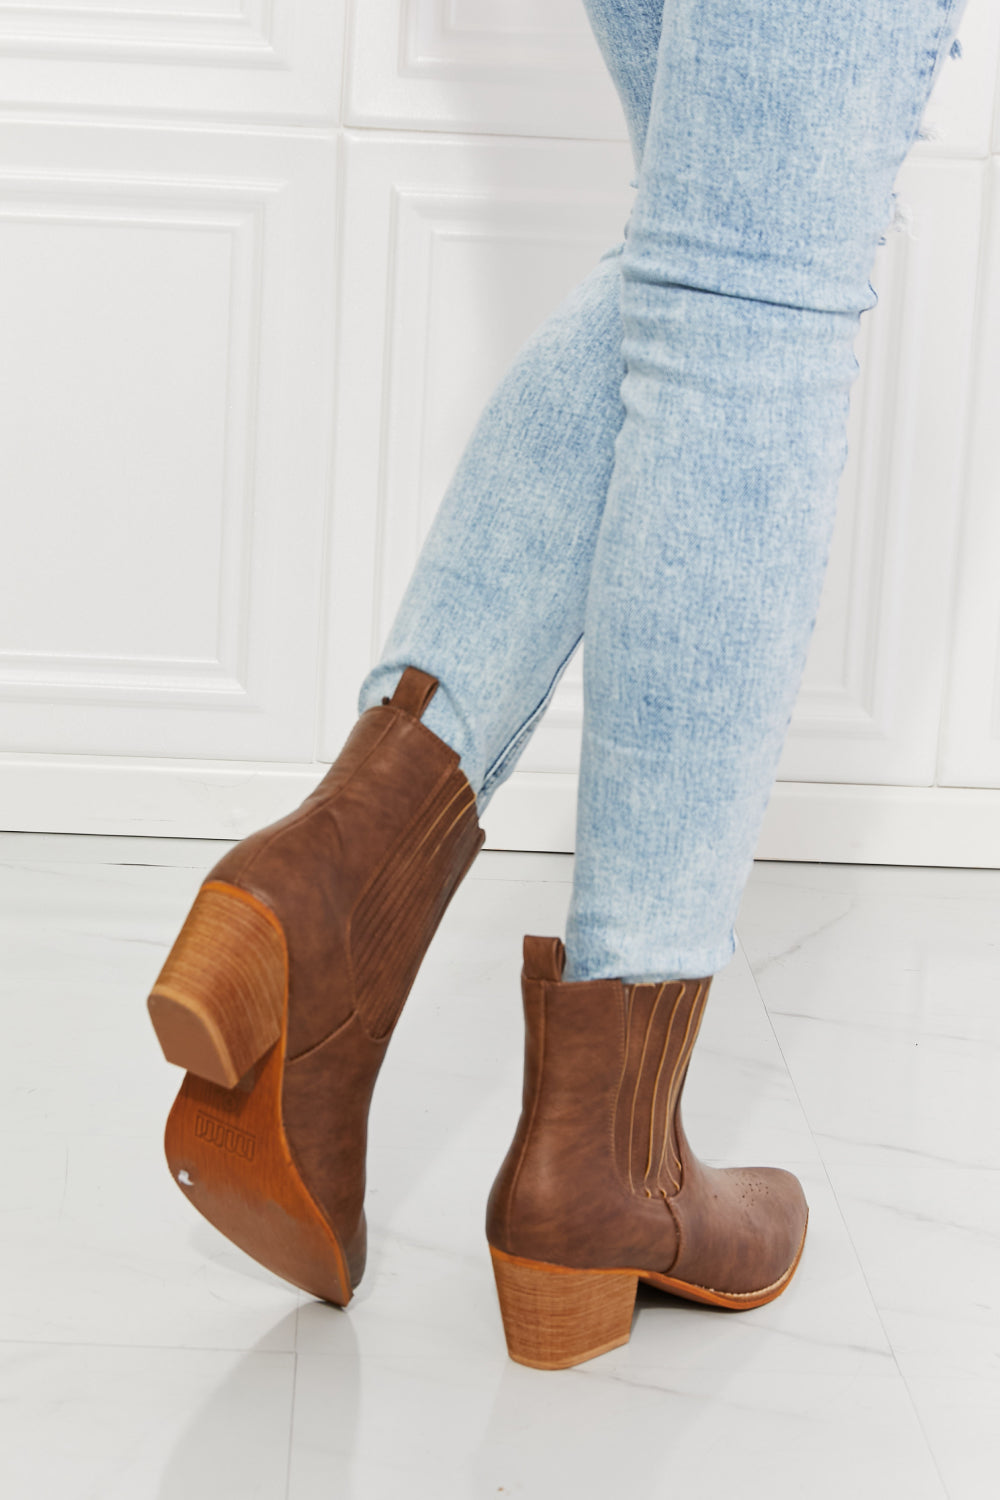 MMShoes Love the Journey Stacked Heel Chelsea Boot in Chestnut - BEAUTY COSMOTICS SHOP